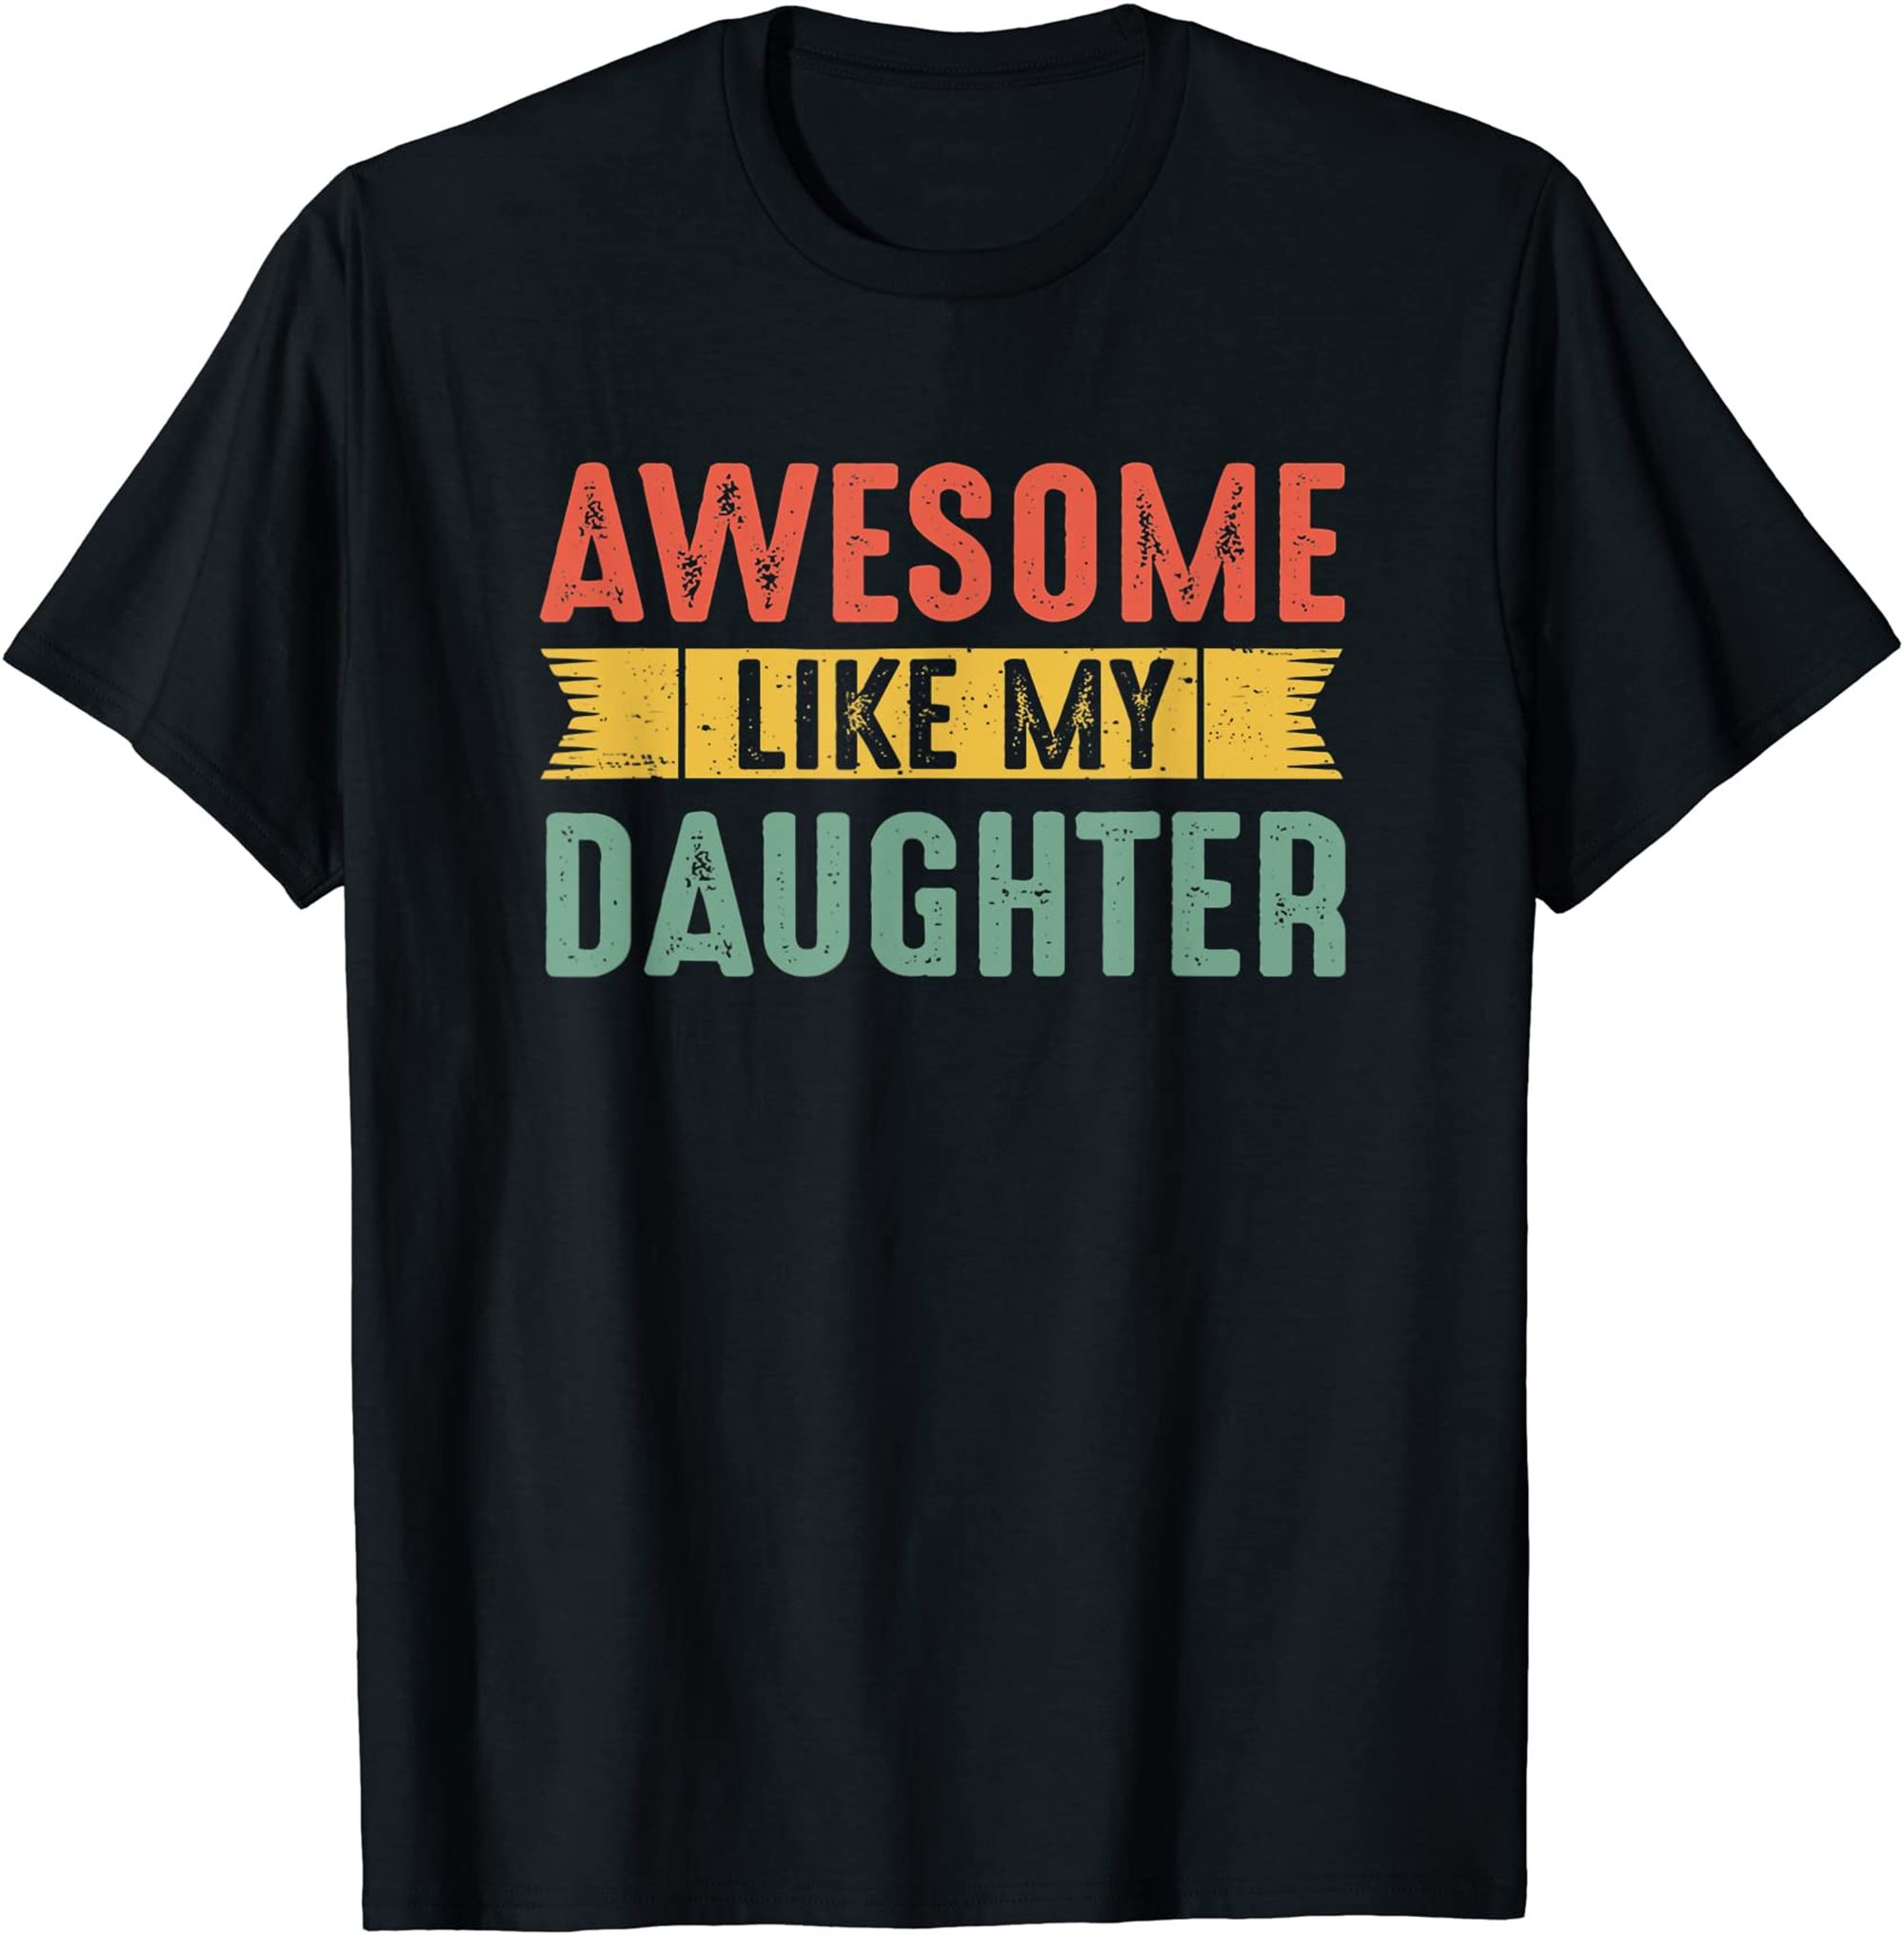 Vintage Awesome Like My Daughter For Dad Funny Fathers Day T-shirt Full Size Up To 5xl